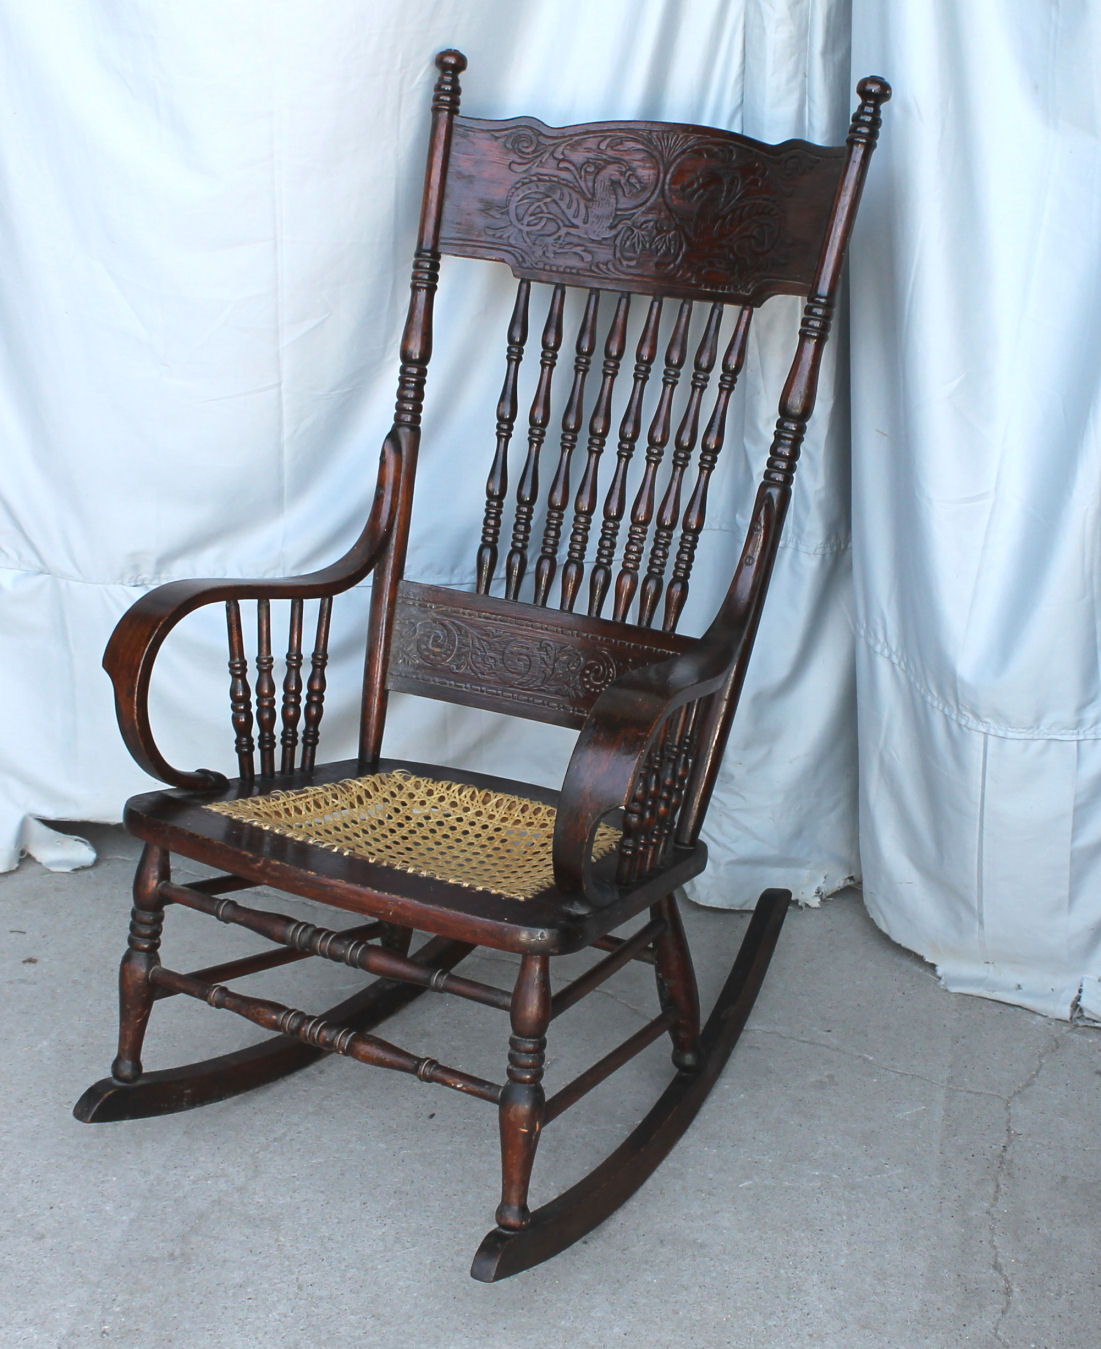 Bargain John S Antiques Rocking Chair With Dragons In The Back